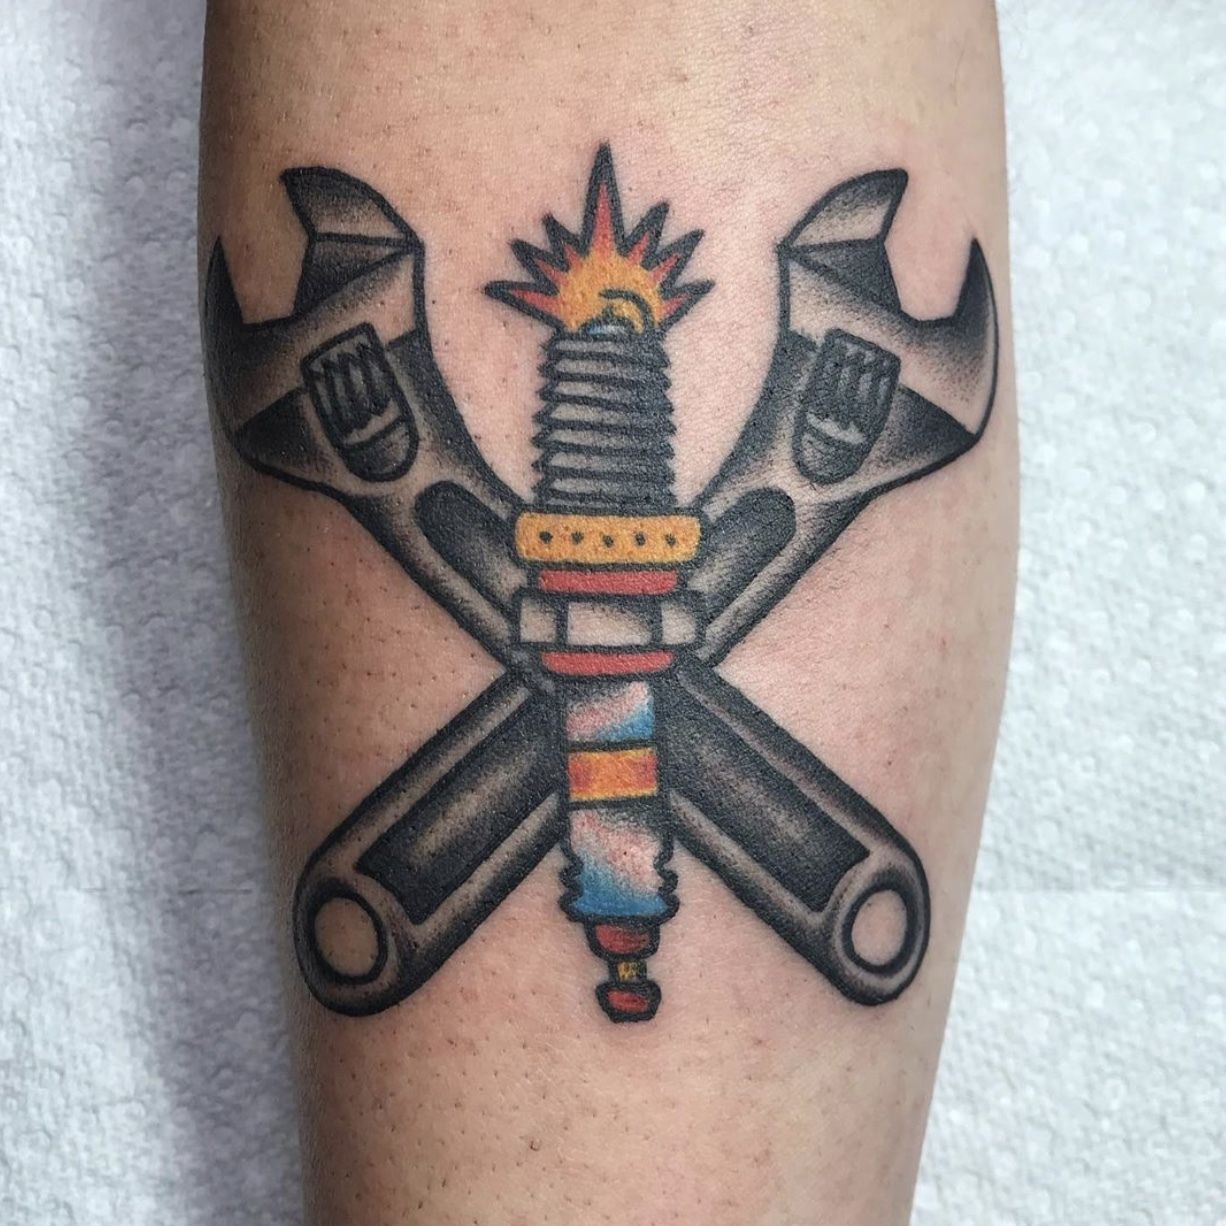 Latest Wrench Tattoos | Find Wrench Tattoos